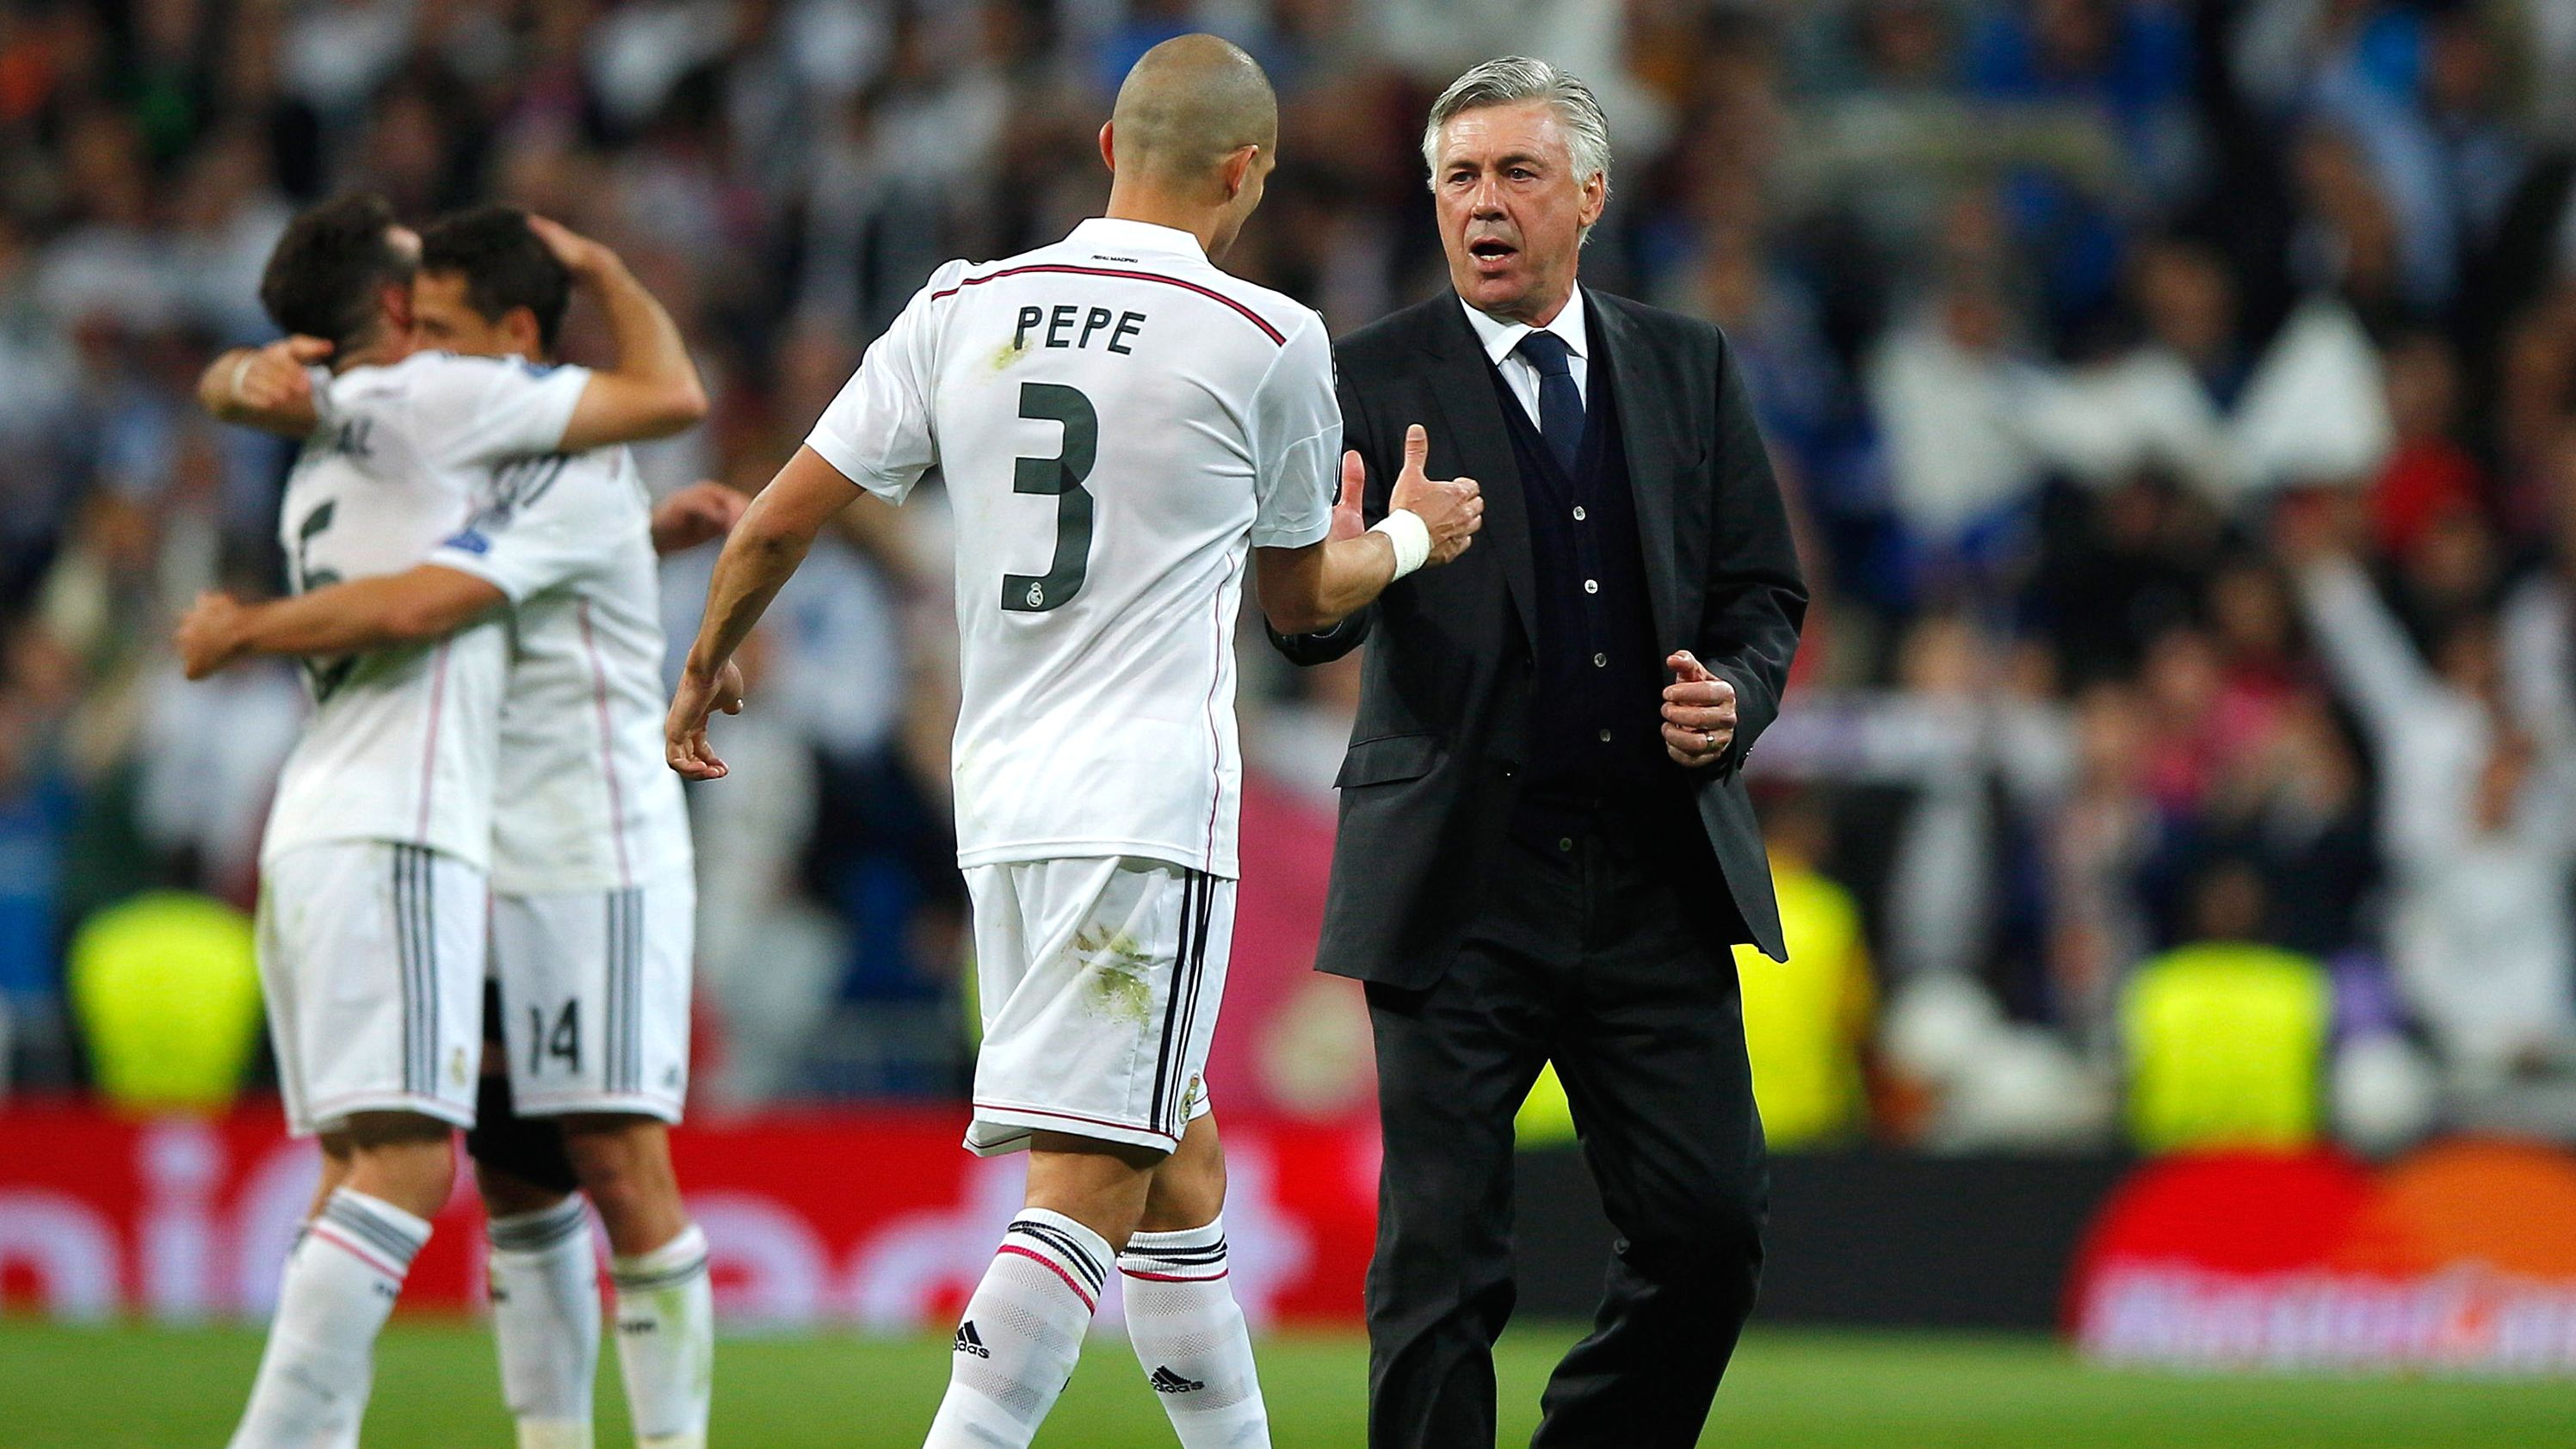 Pepe celebrates victory with Ancelotti after the UEFA Champions League quarter-final second leg match against Atletico Madrid.  